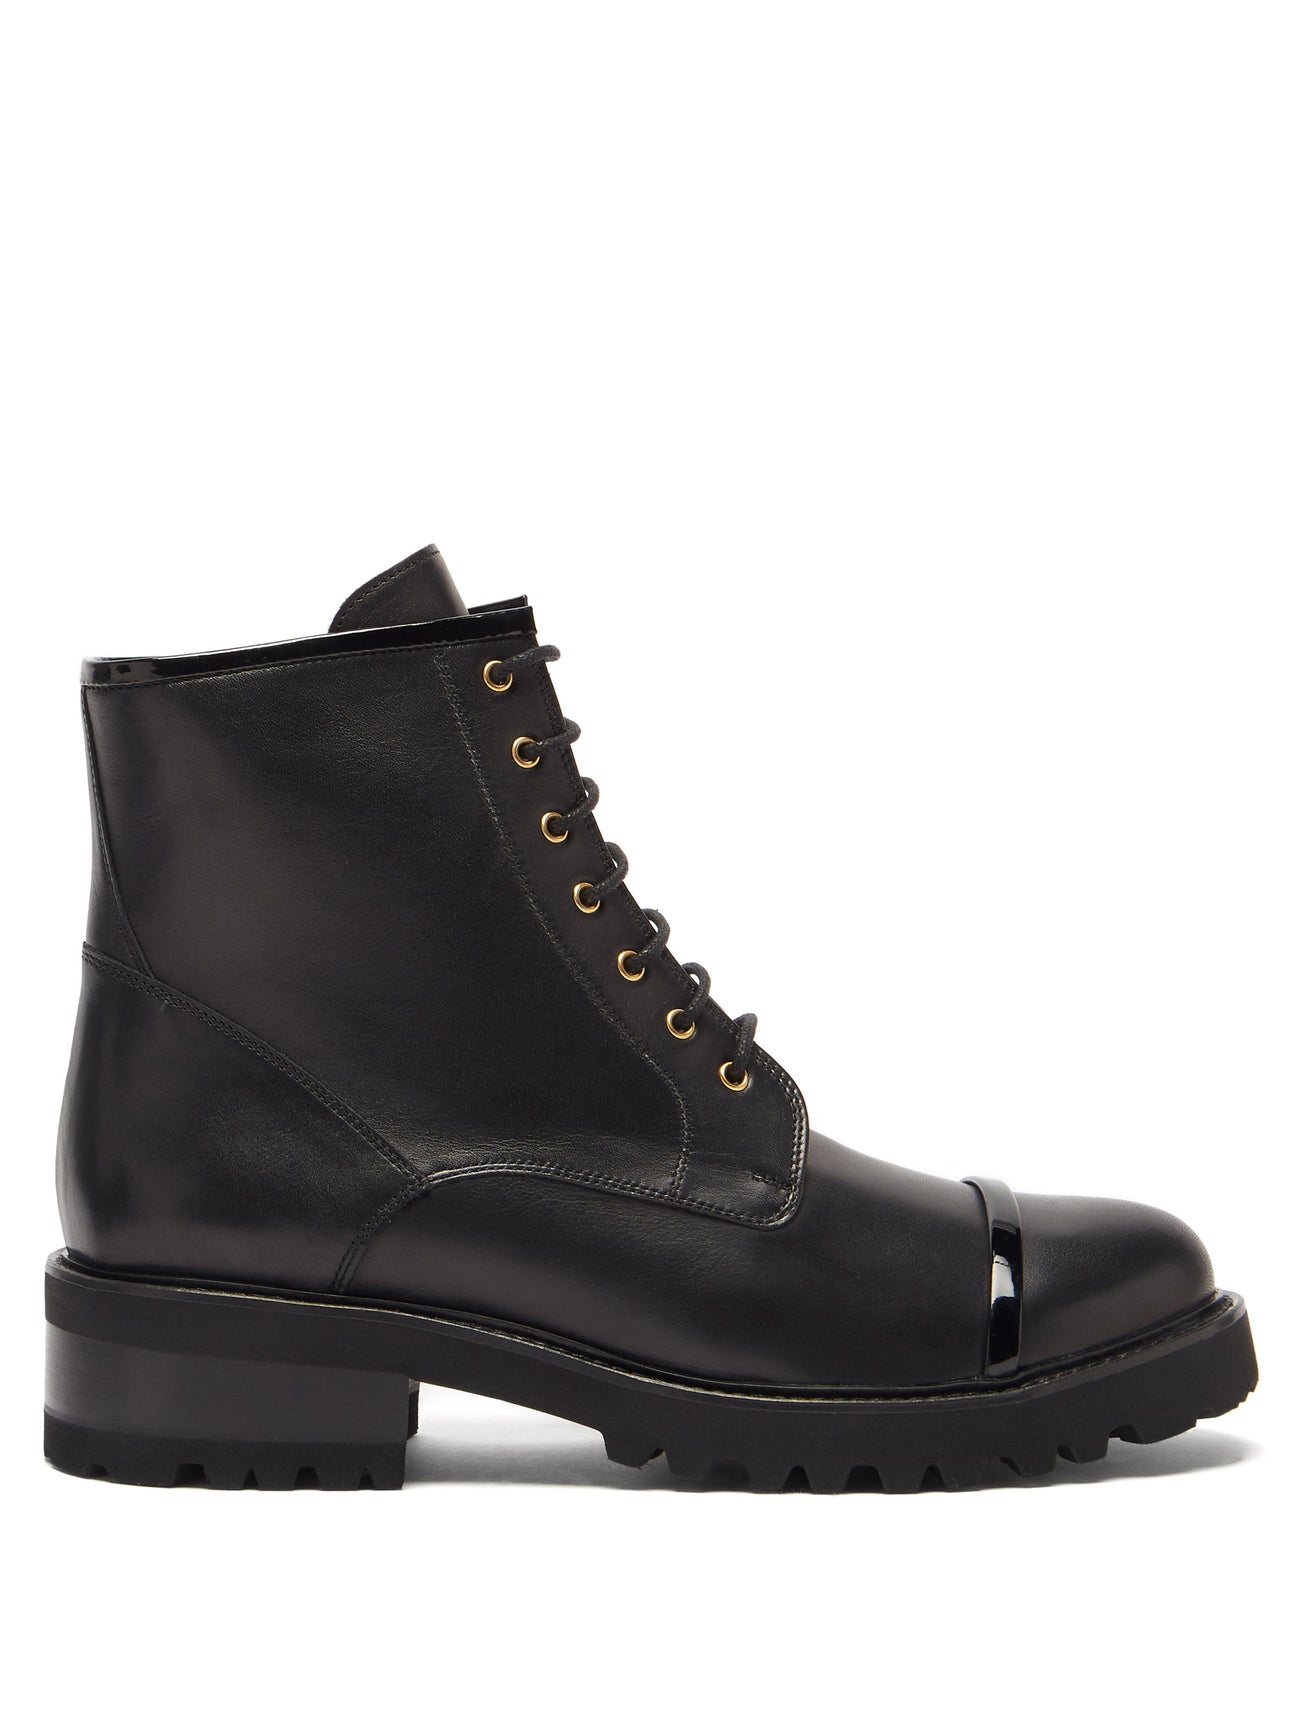 MALONE SOULIERS Bryce leather combat boots £595